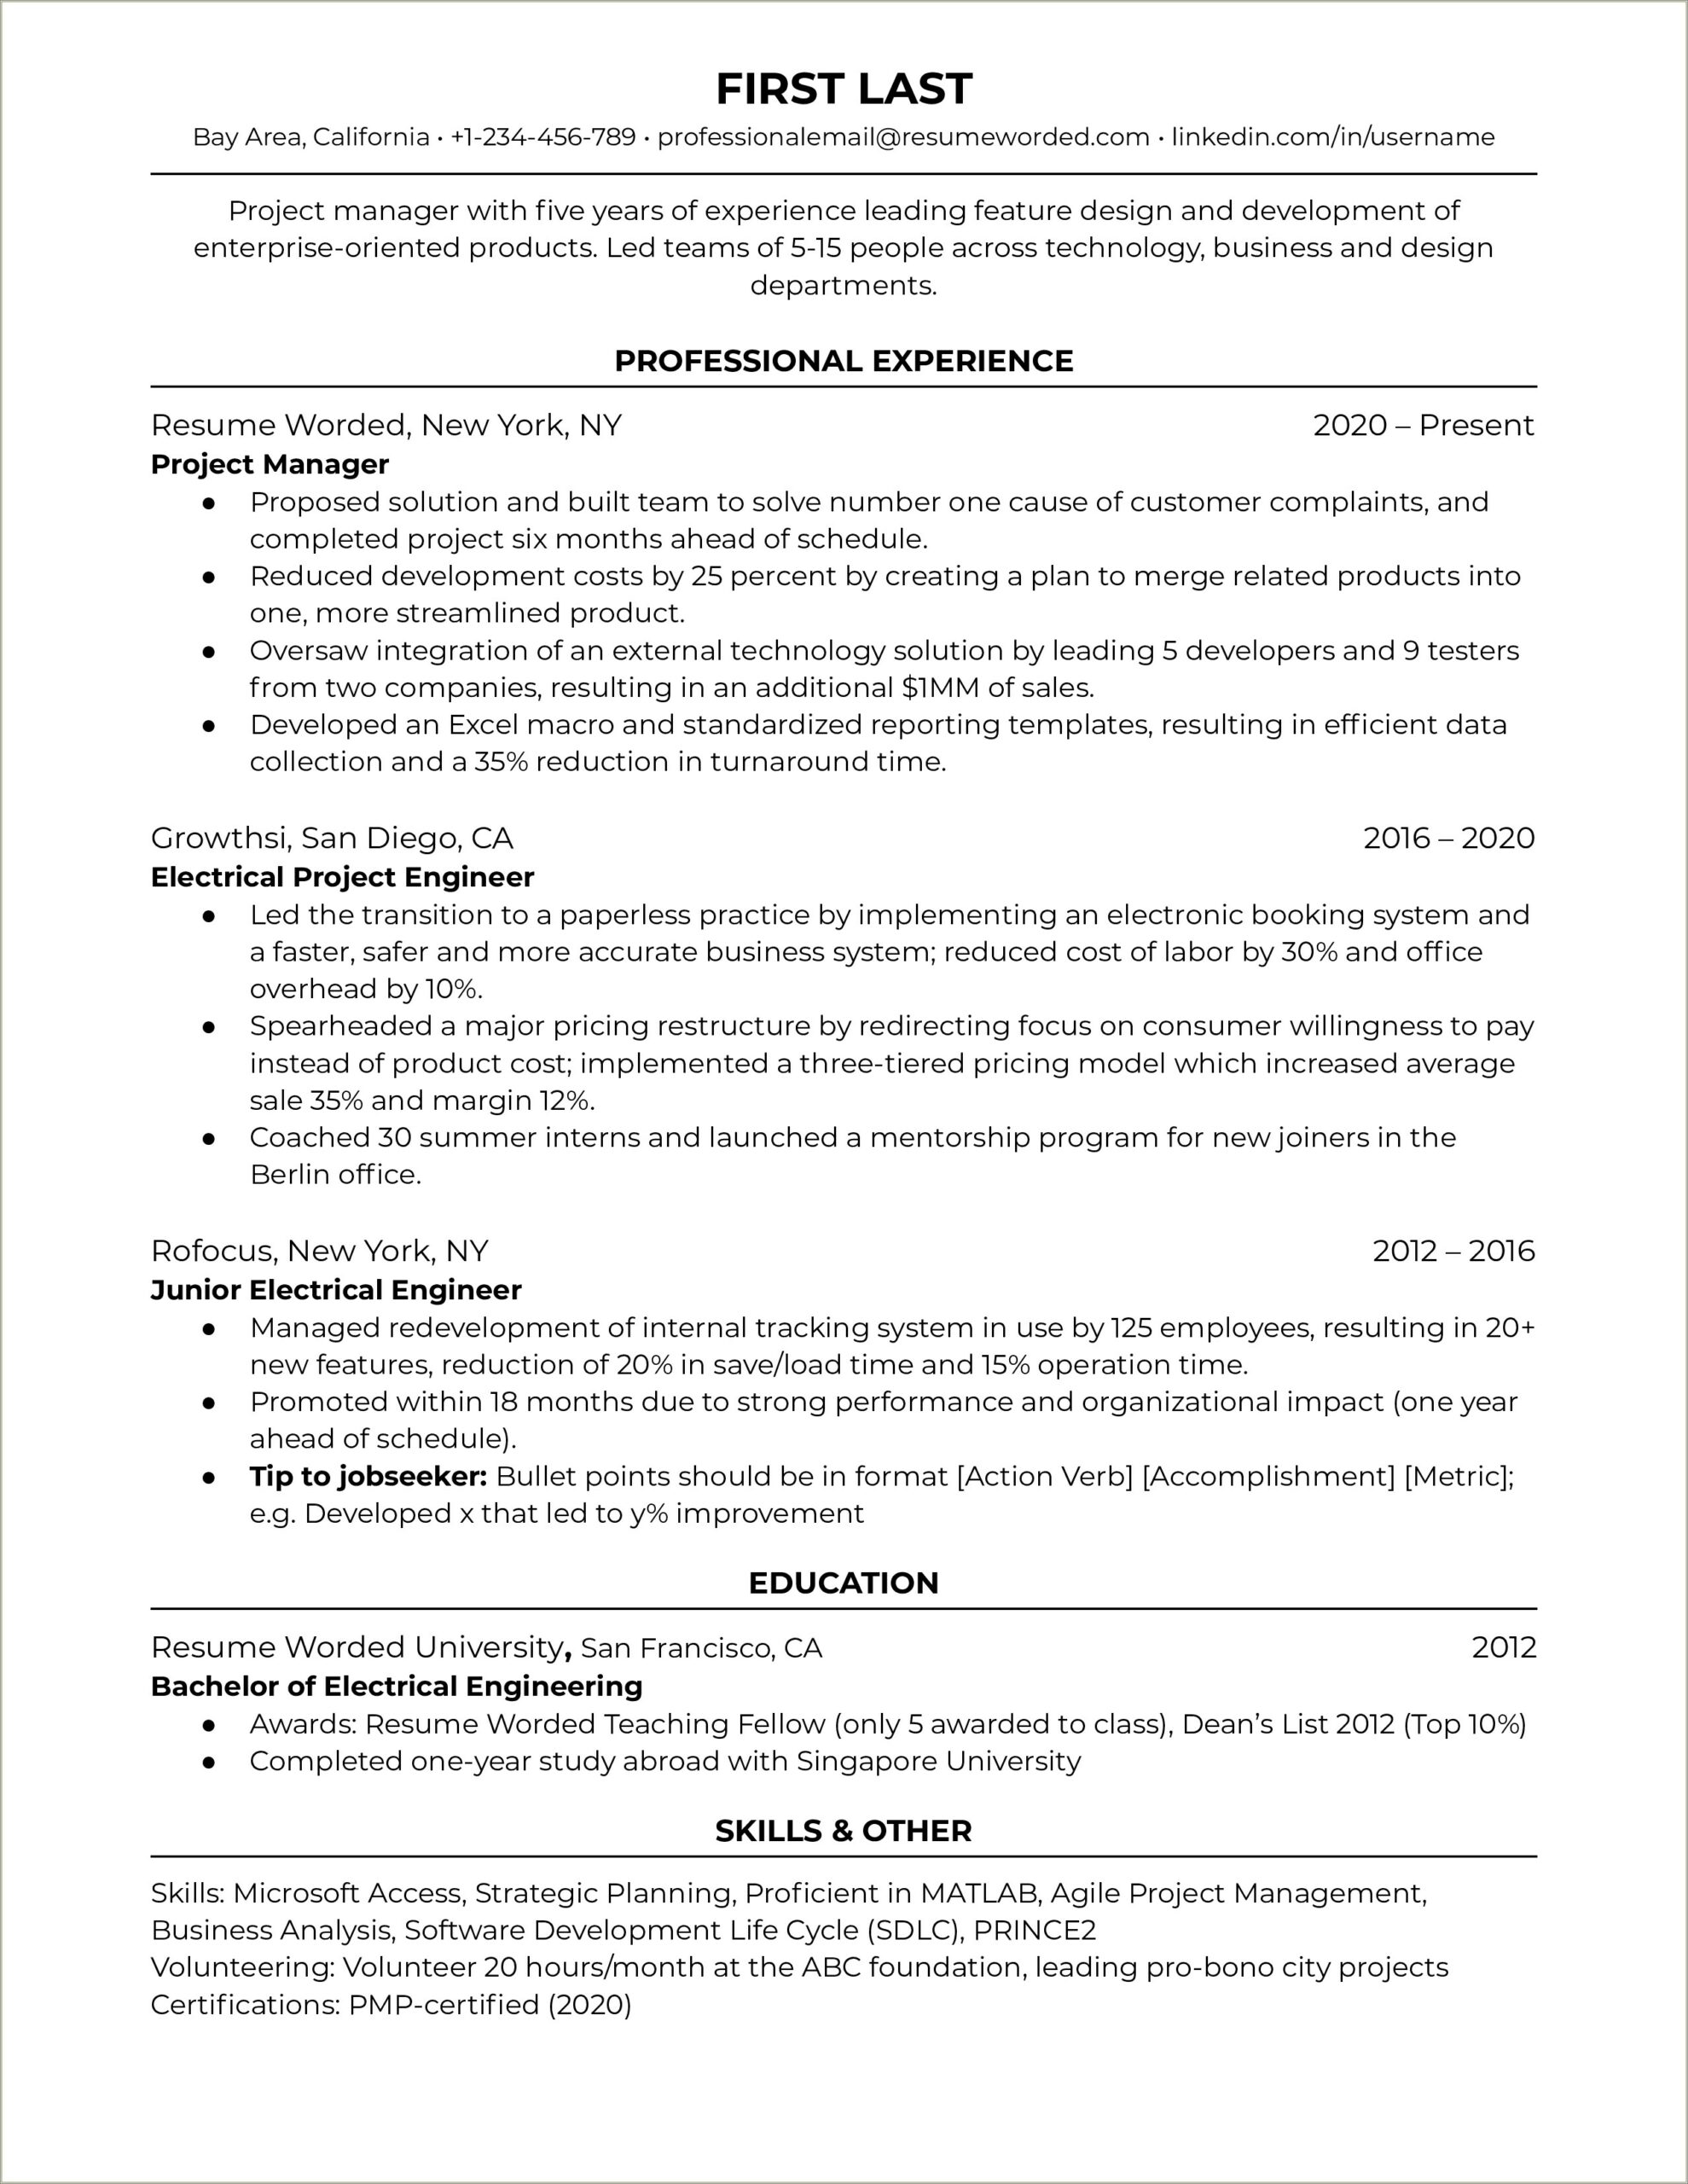 Project Management Skills To List On Resume